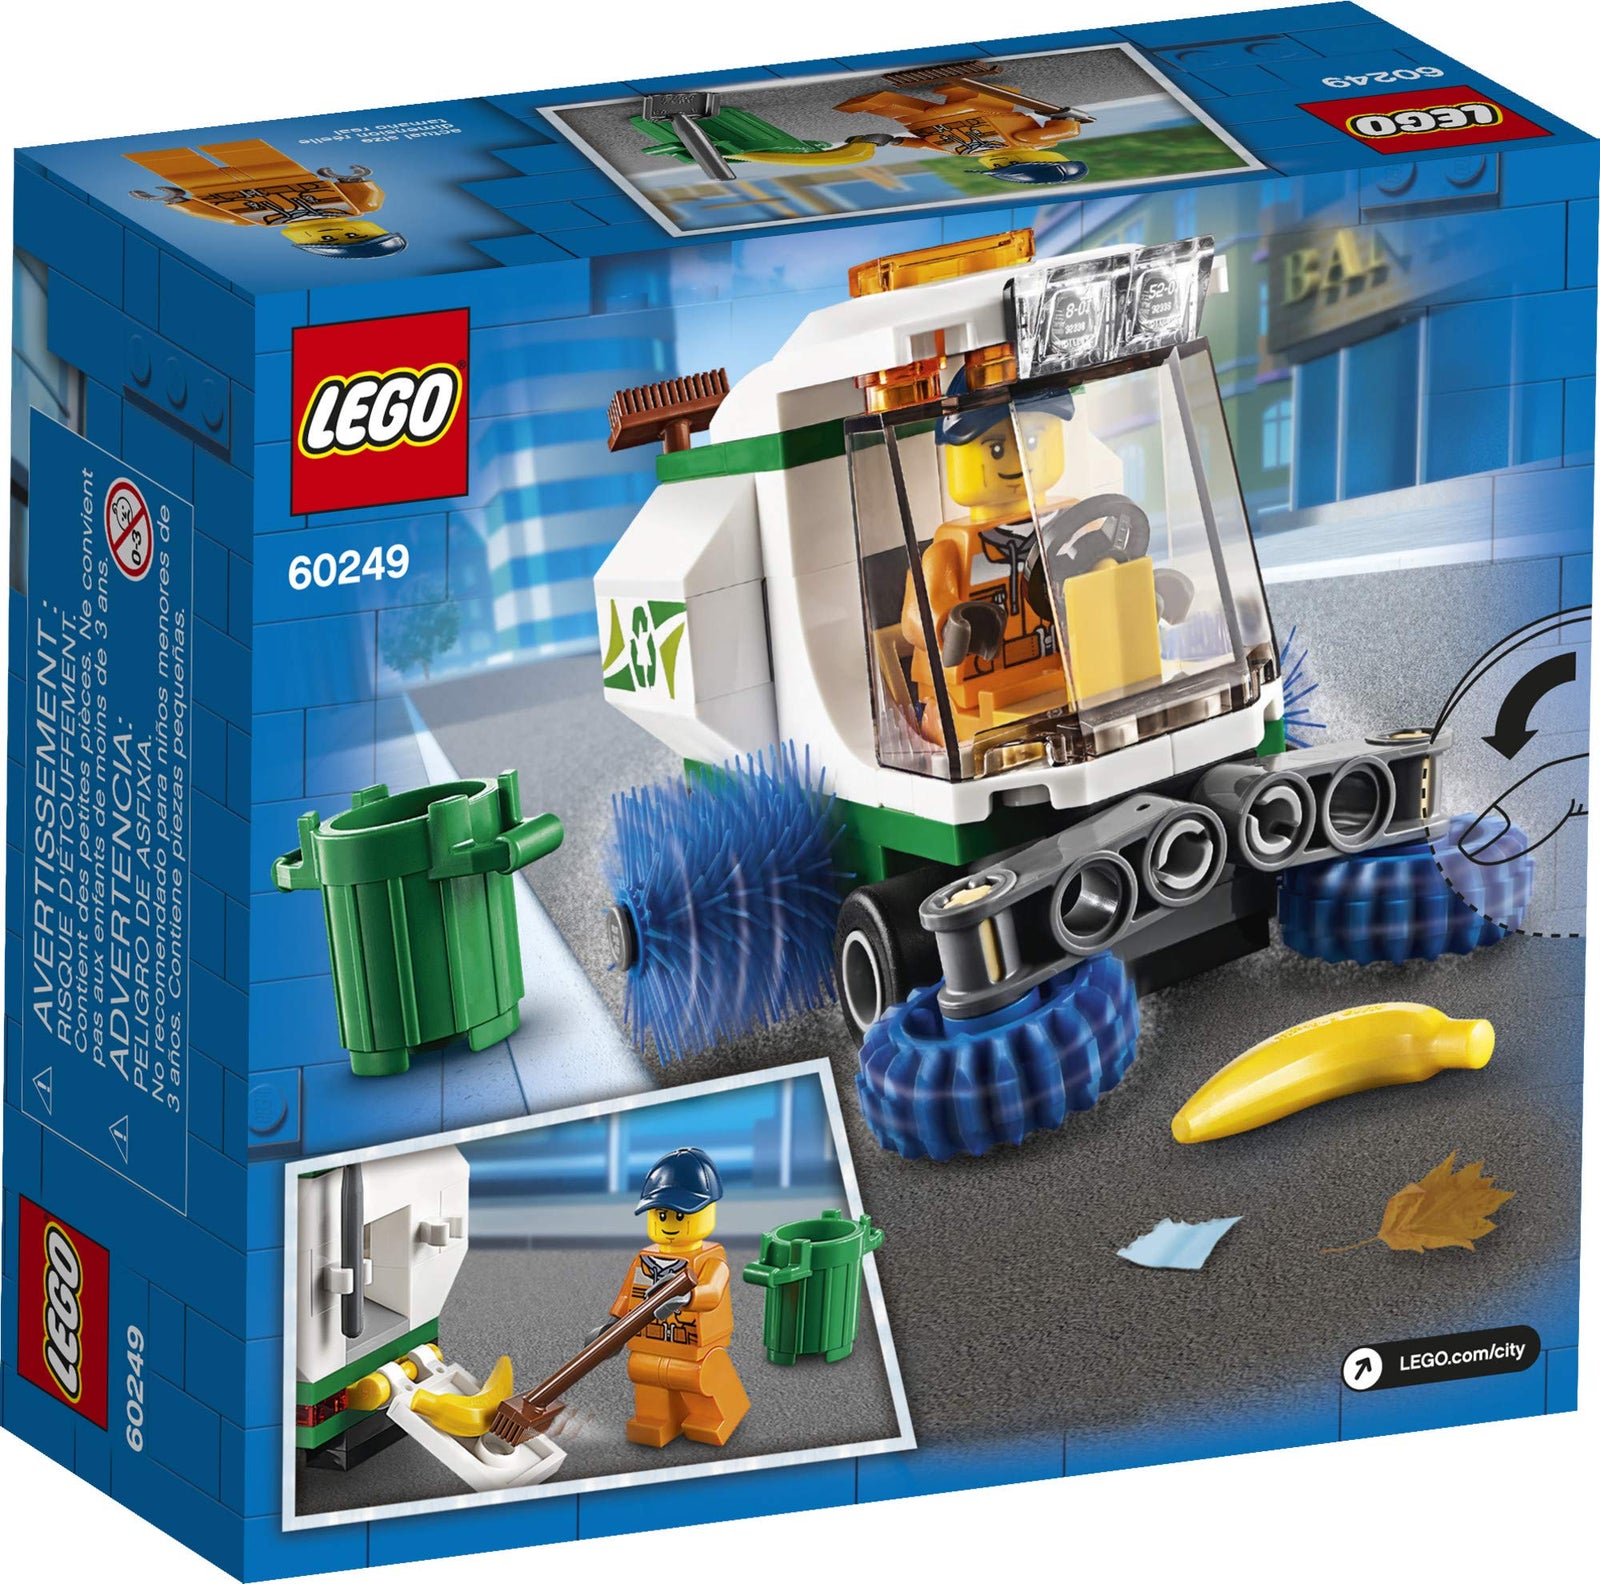 LEGO City Street Sweeper 60249 Construction Toy, Cool Building Toy for Kids (89 Pieces)